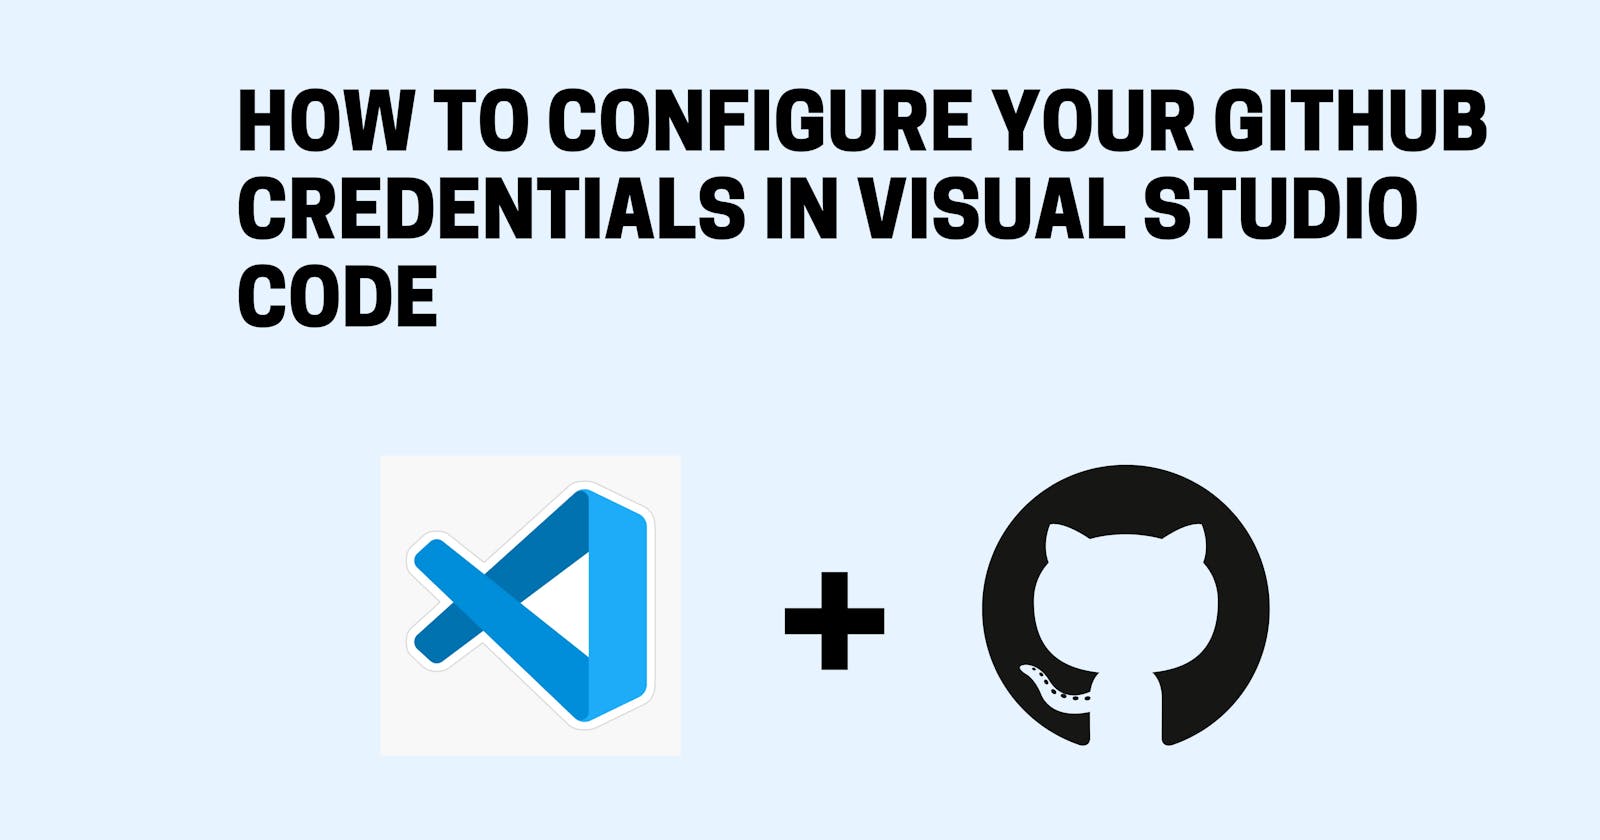 How to Configure your GitHub Credentials In Visual Studio Code.